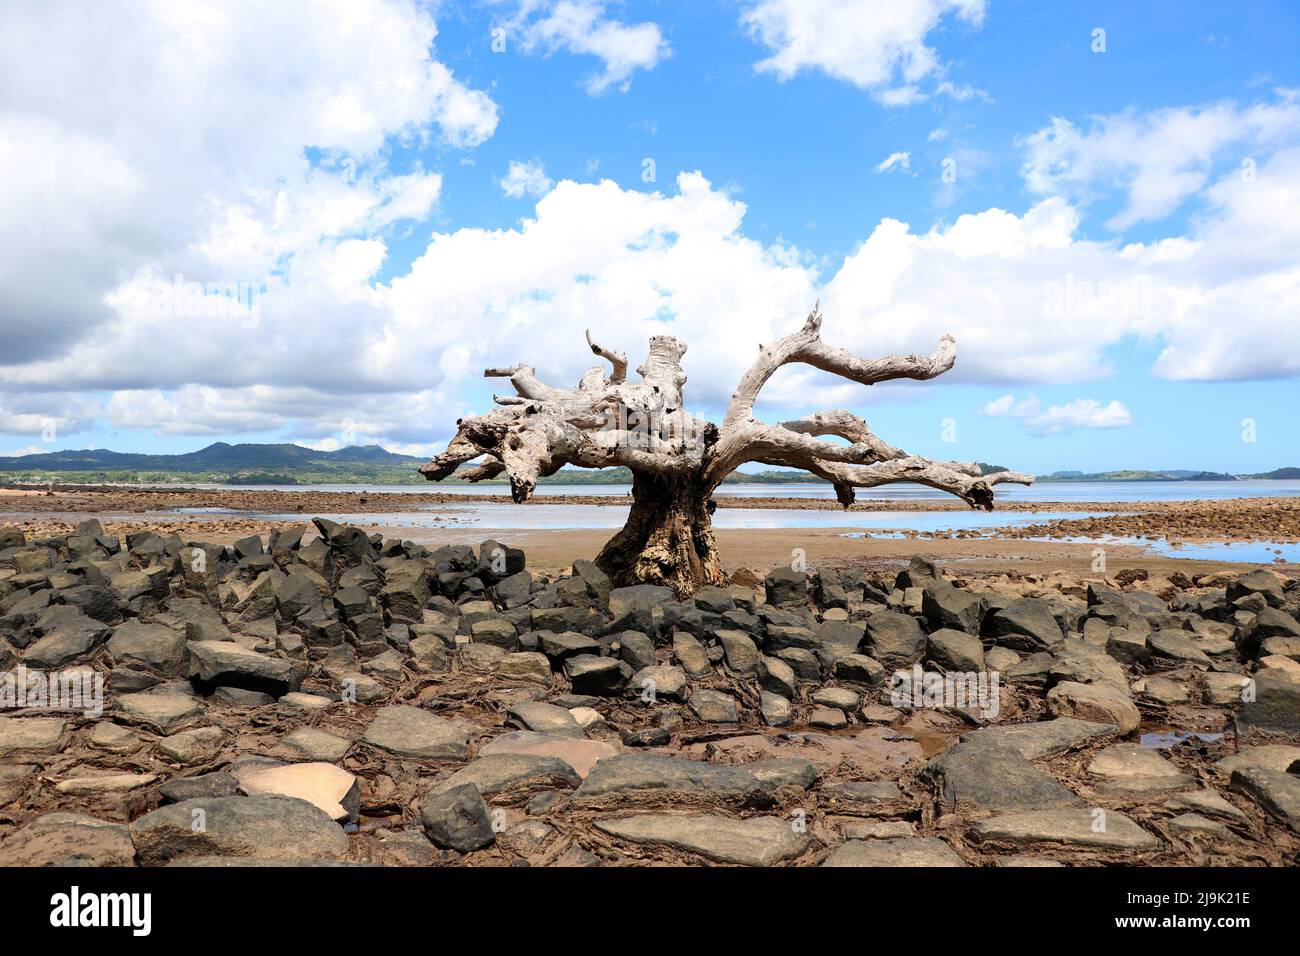 Alone on the beach stands a dead mangrove. Idyllically it waits for the tide. Stock Photo